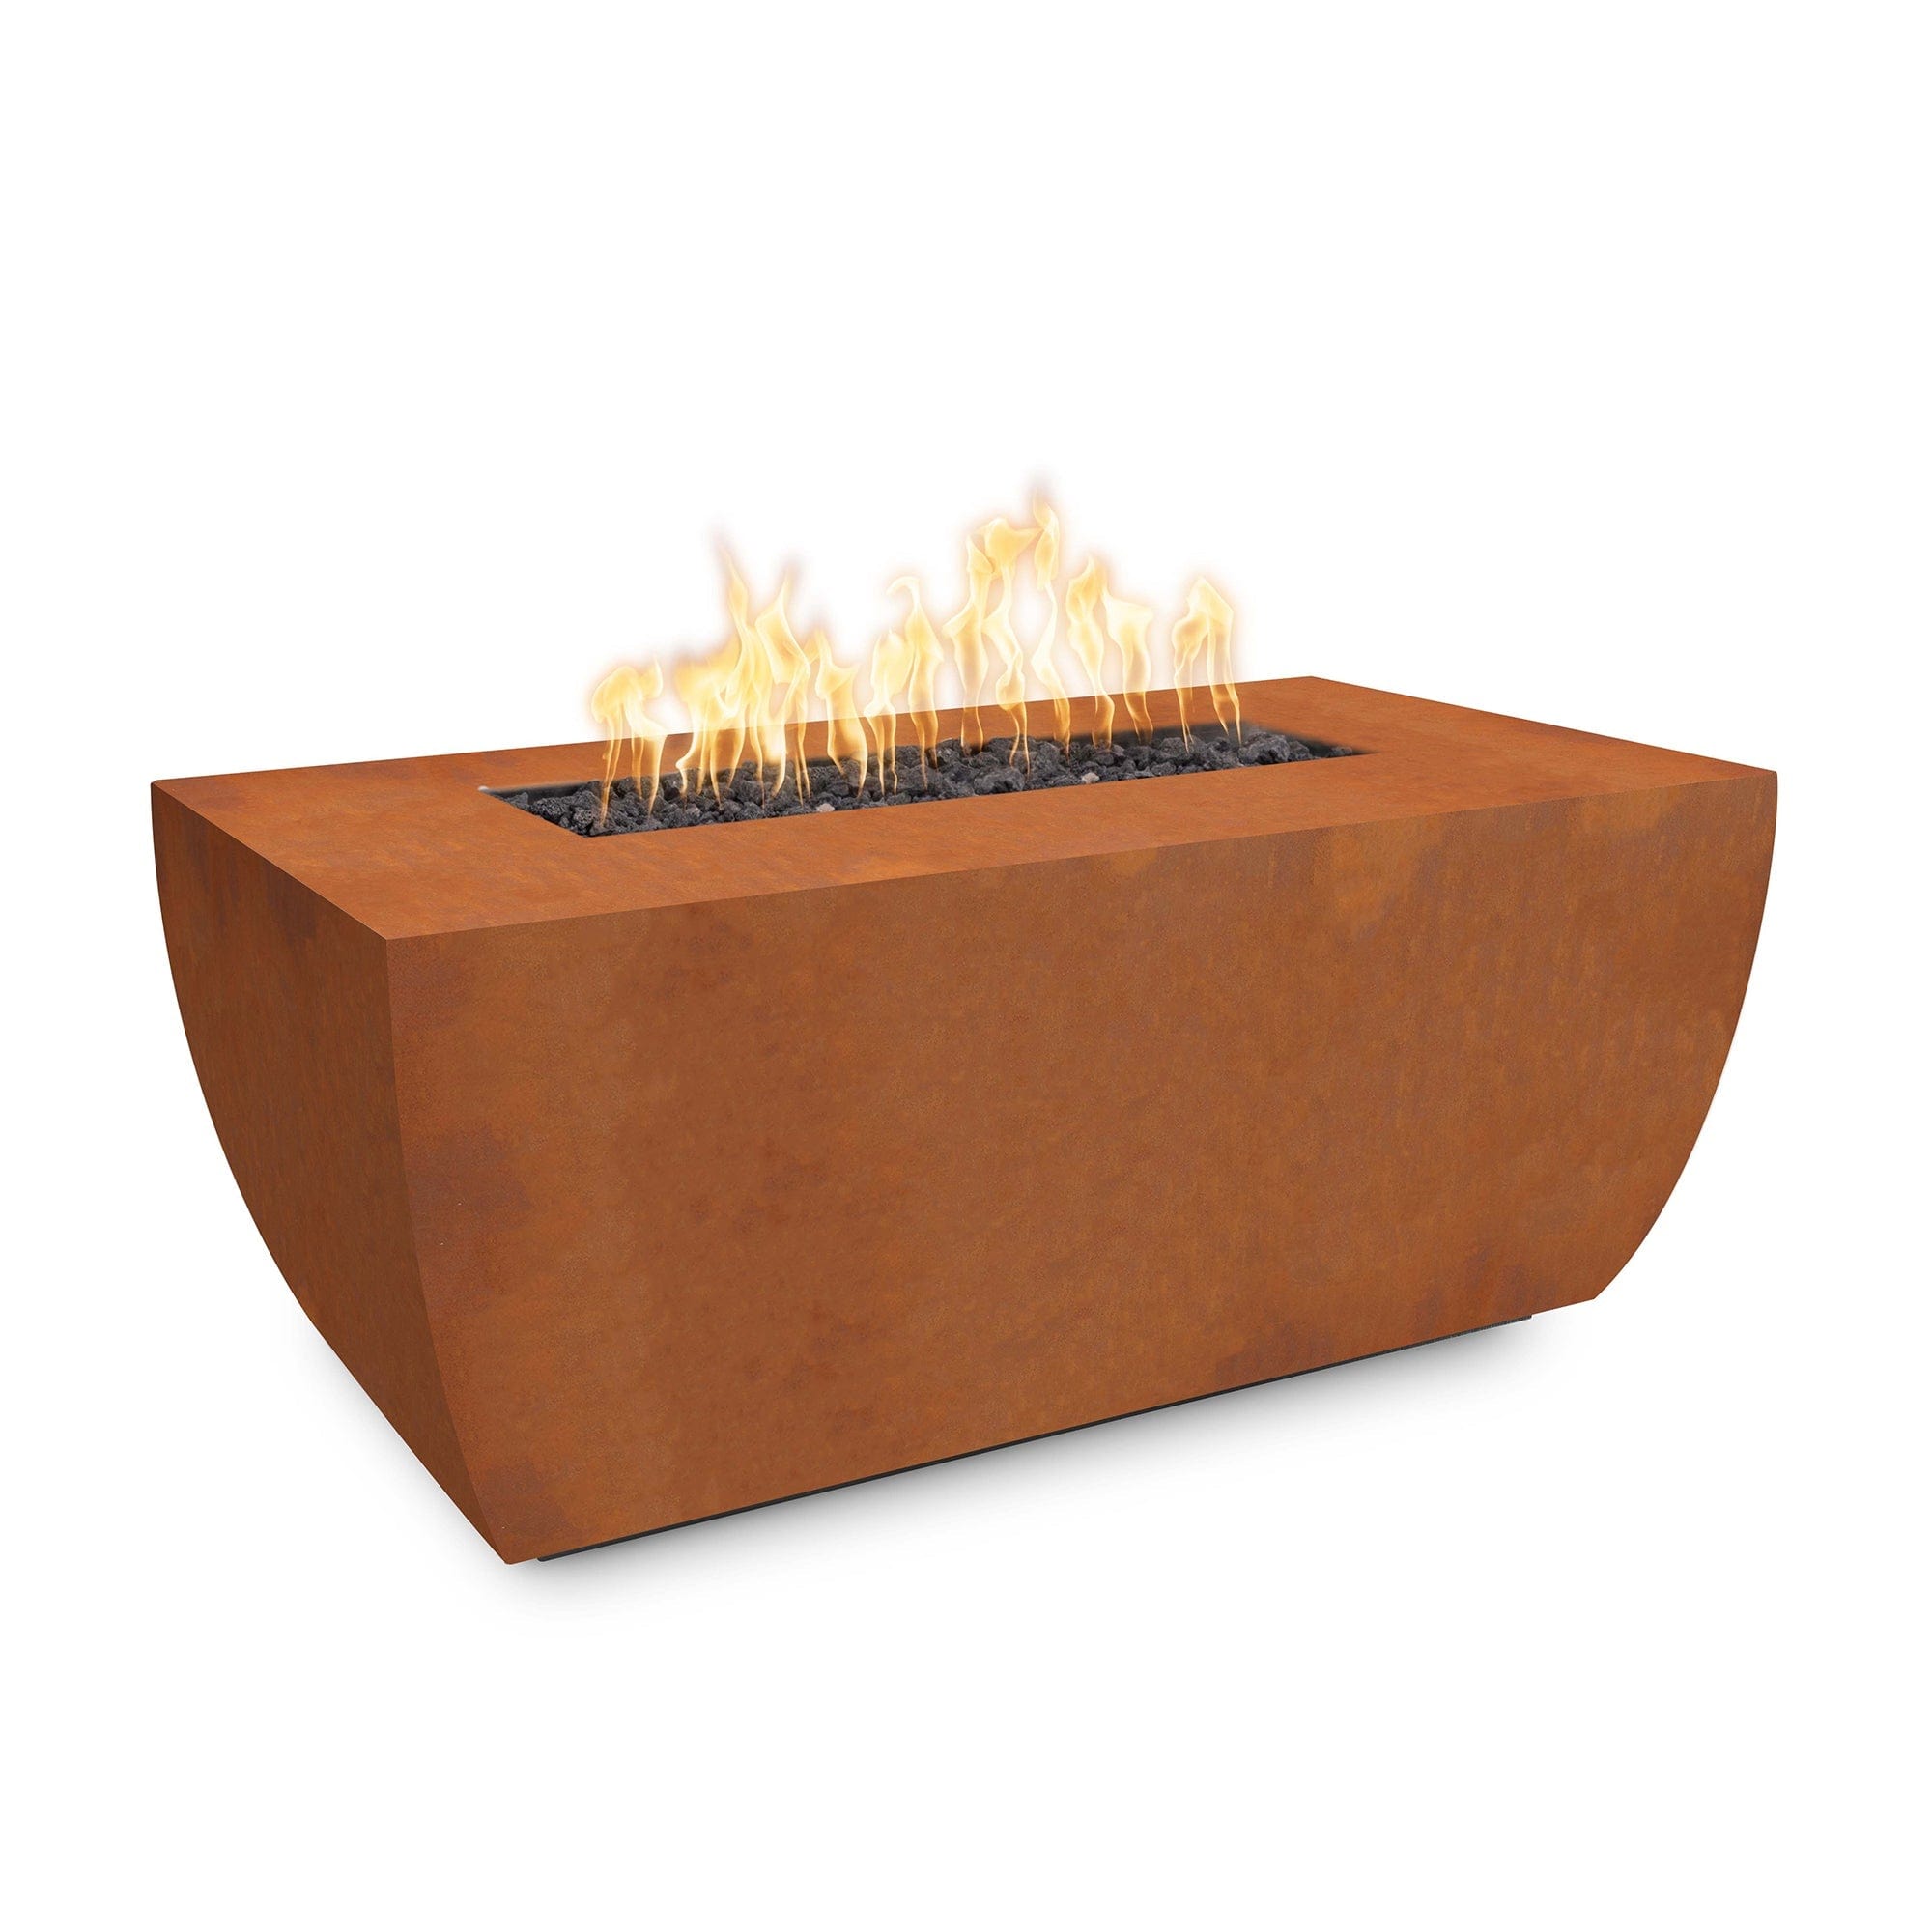 The Outdoor Plus Avalon 24-inch Tall Fire Pit Corten Steel Finish with White Background